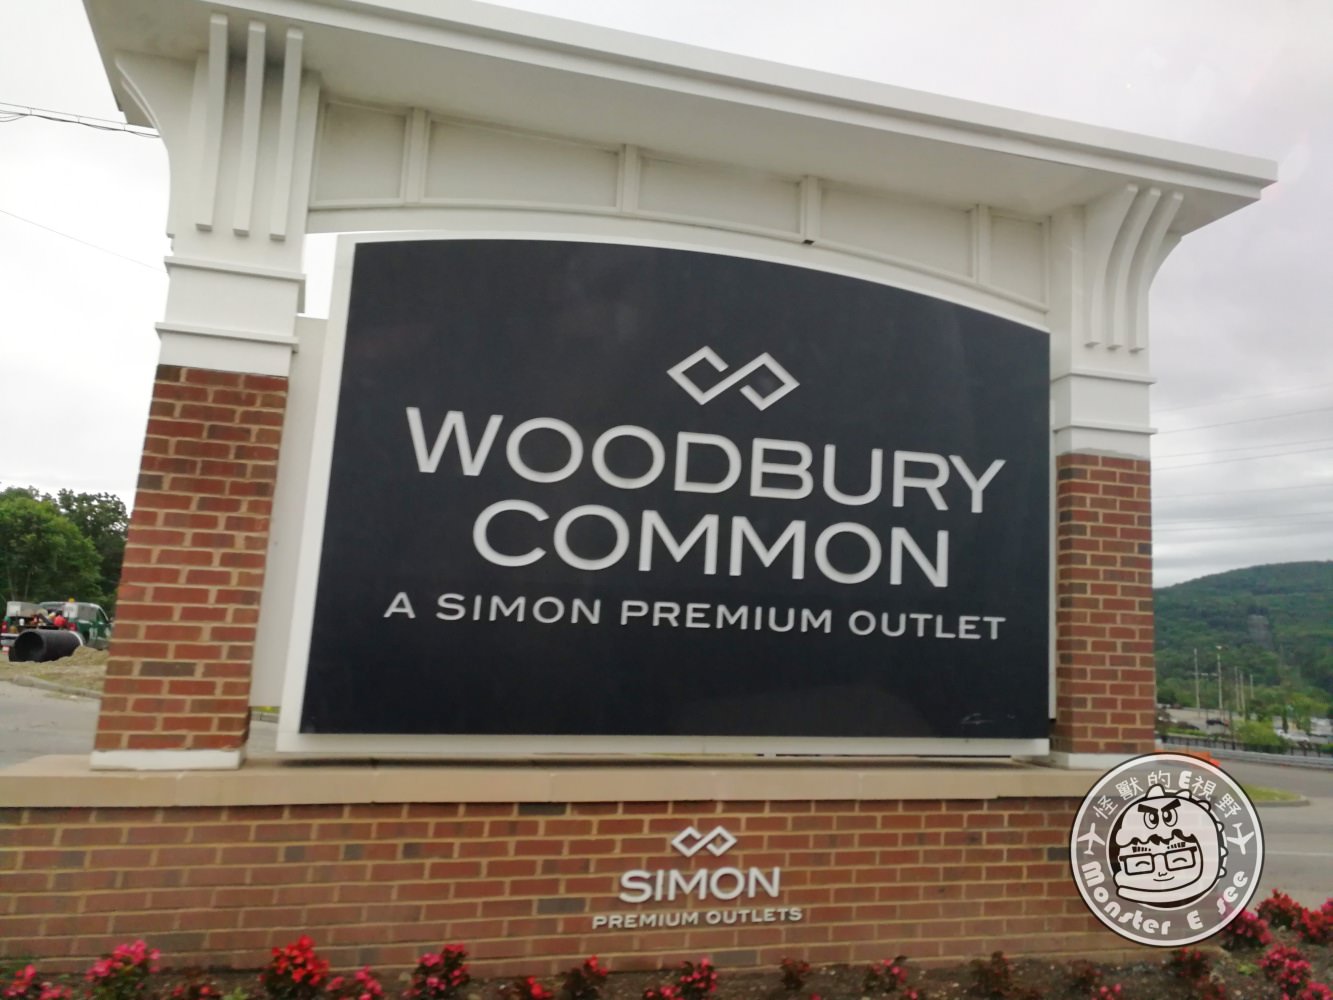 Woodbury Common Premium Outlets4